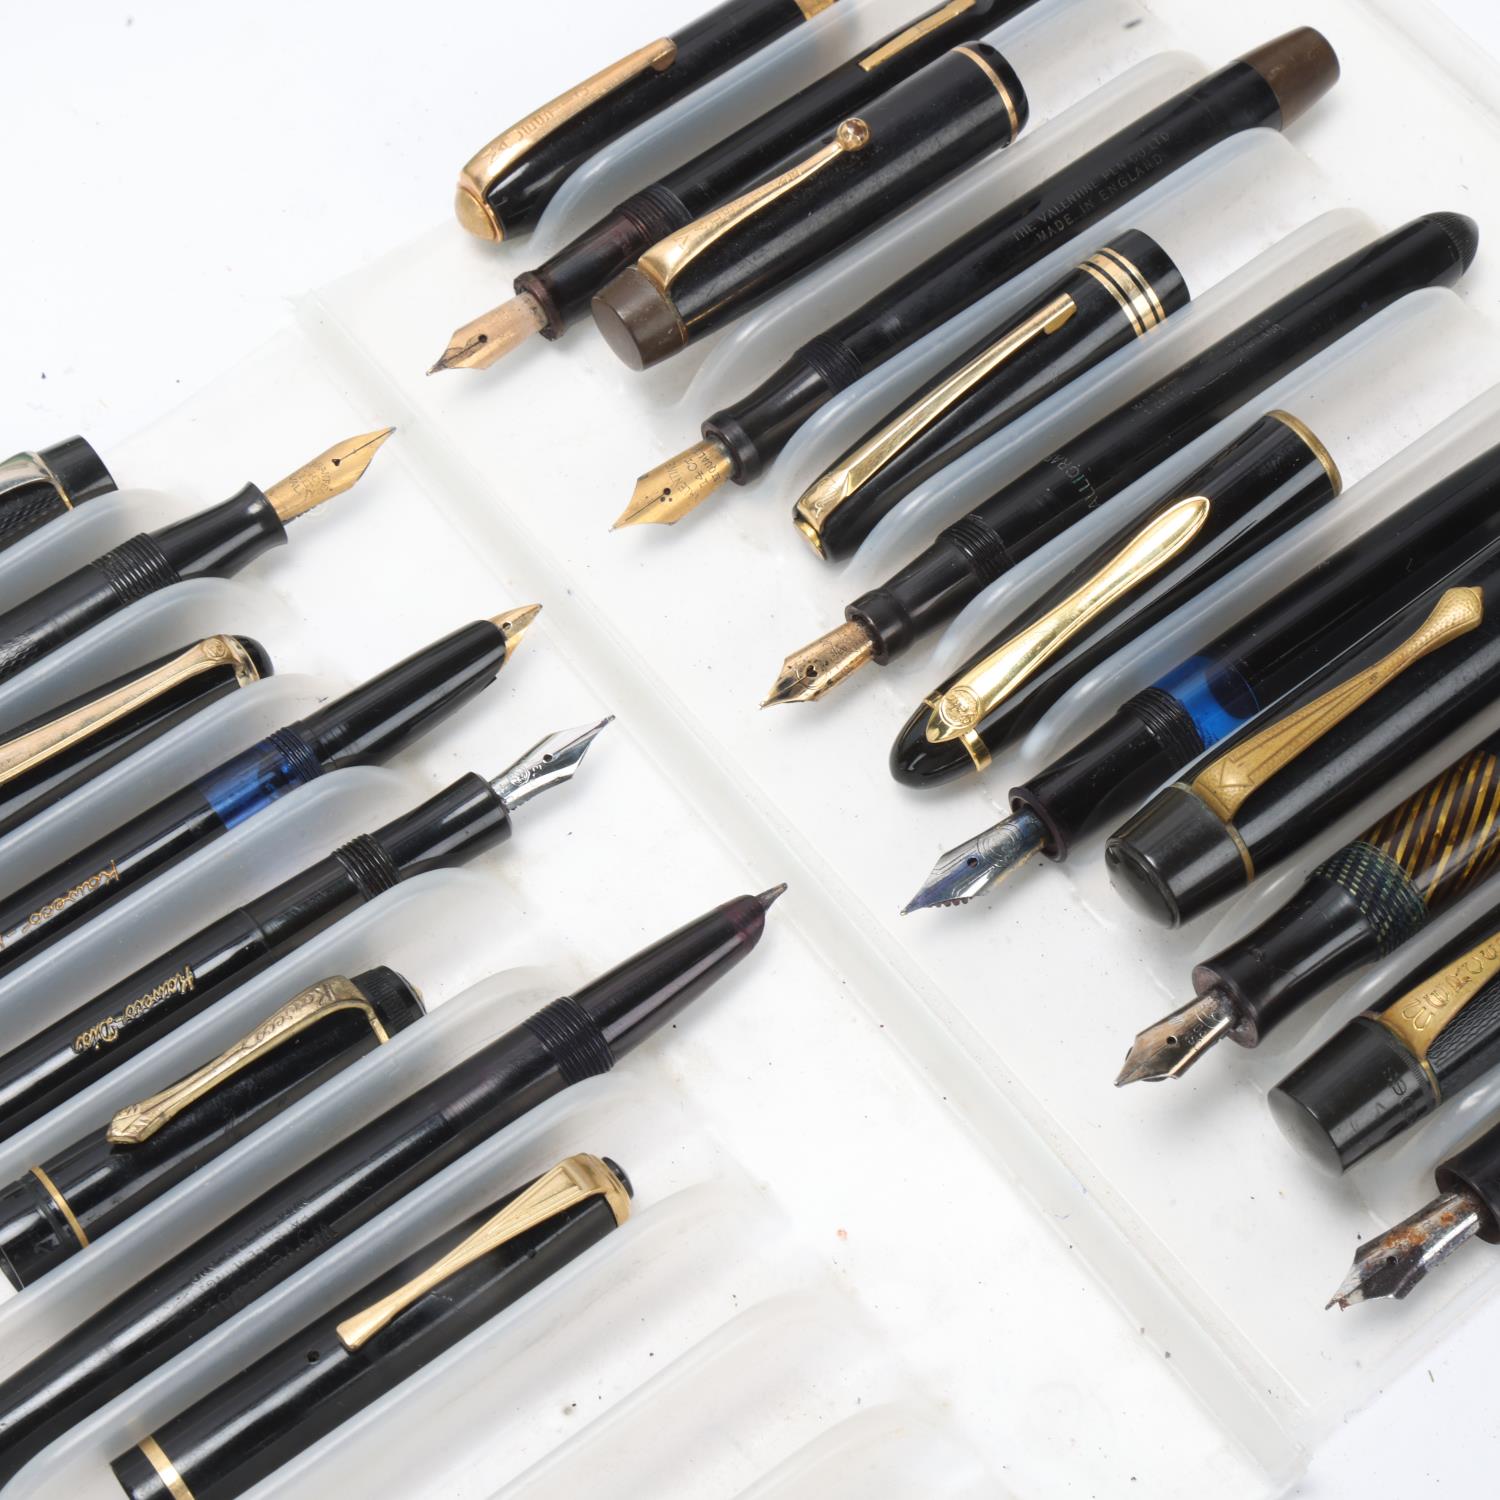 10 vintage fountain pens, early to mid 20th century, includes models by Mercedes, Swan(Mabie, Todd), - Image 2 of 4